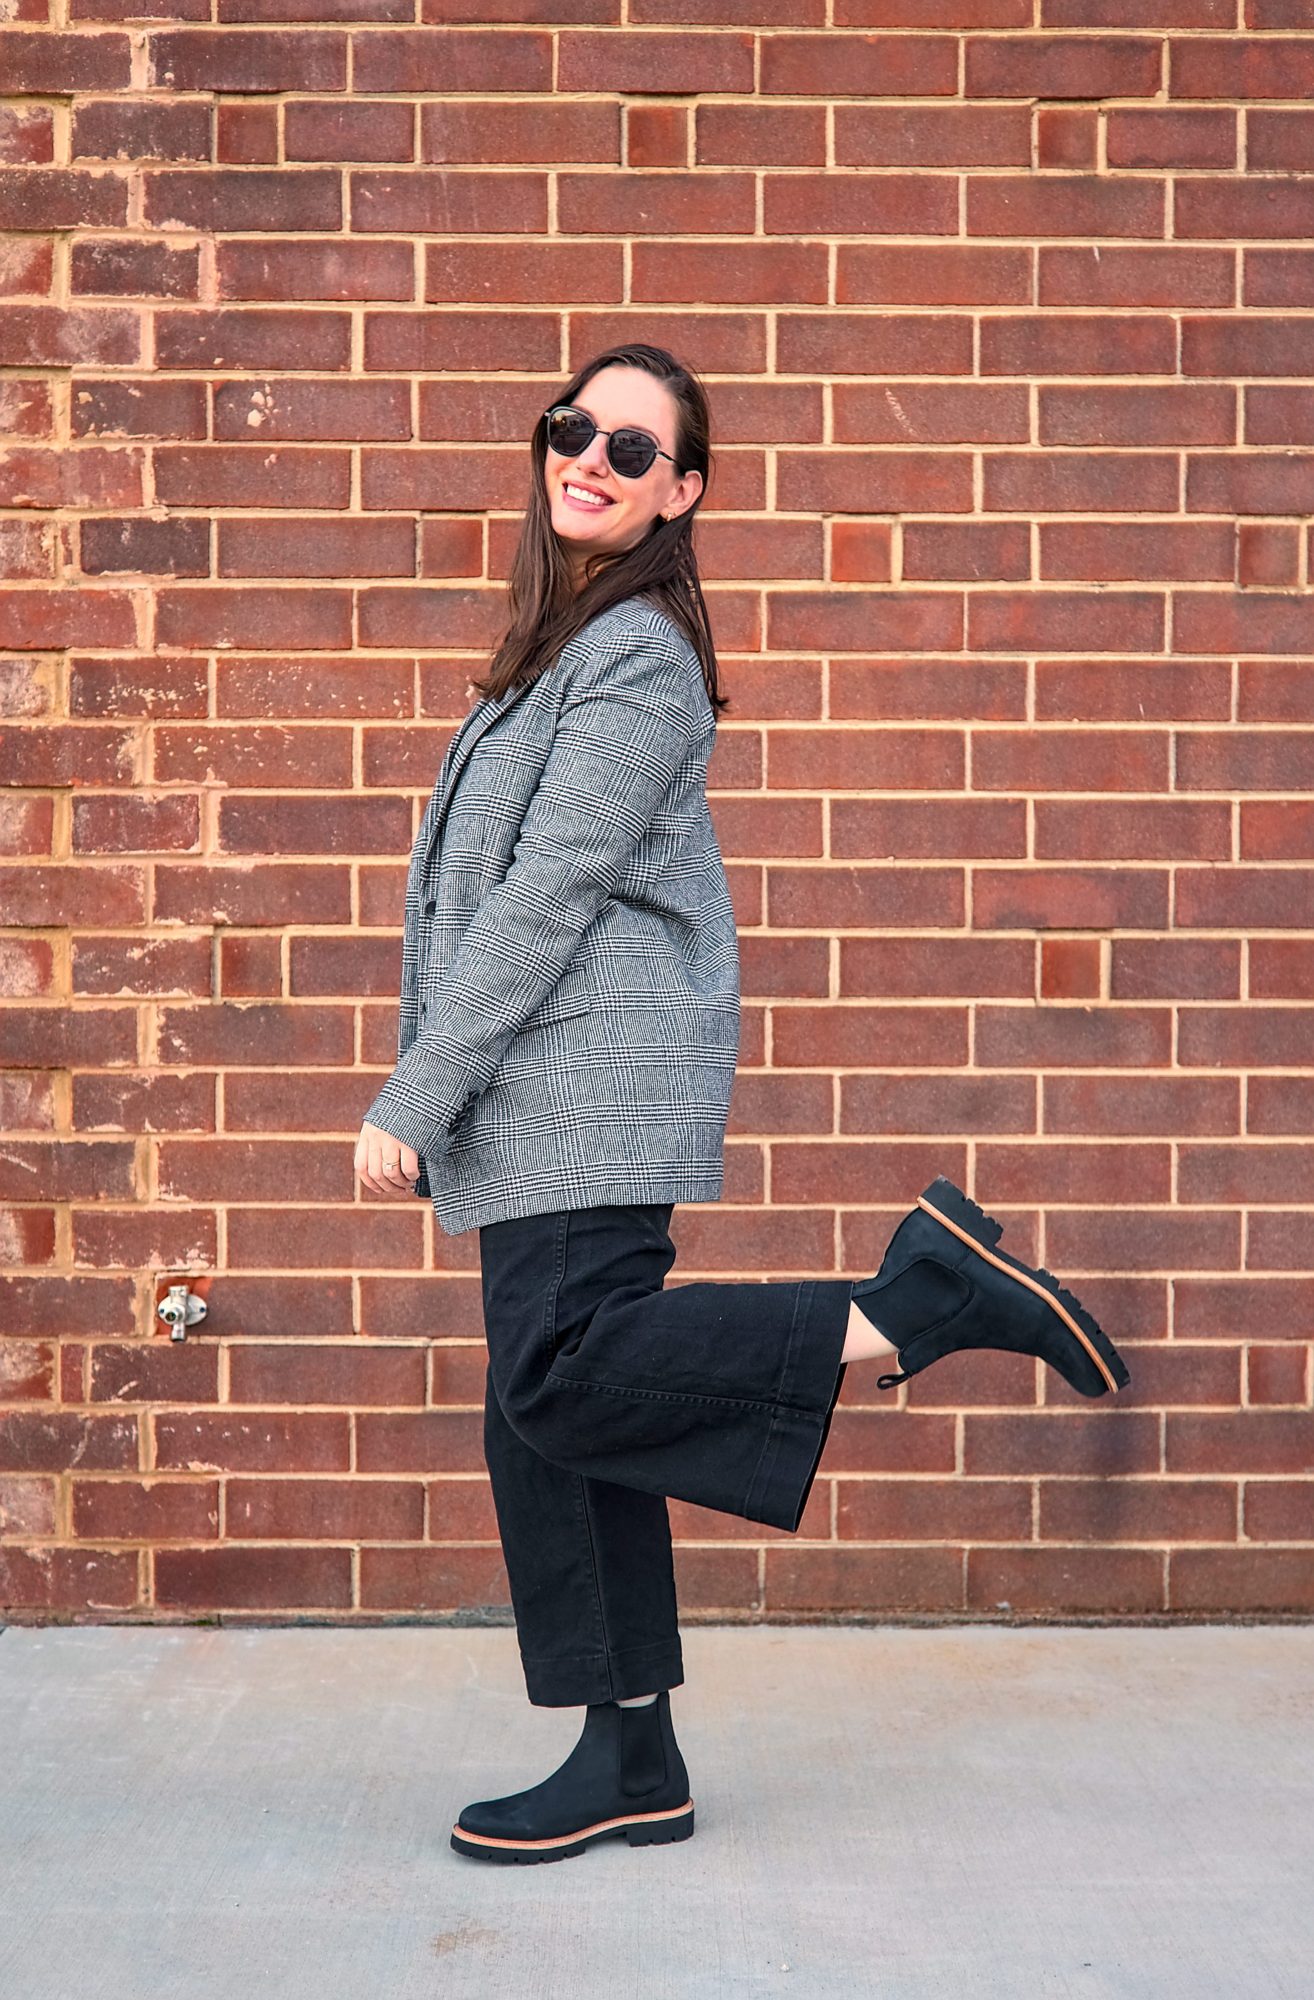 Alyssa wears the Go-To Lug Chelsea Boot with a plaid blazer and black pants